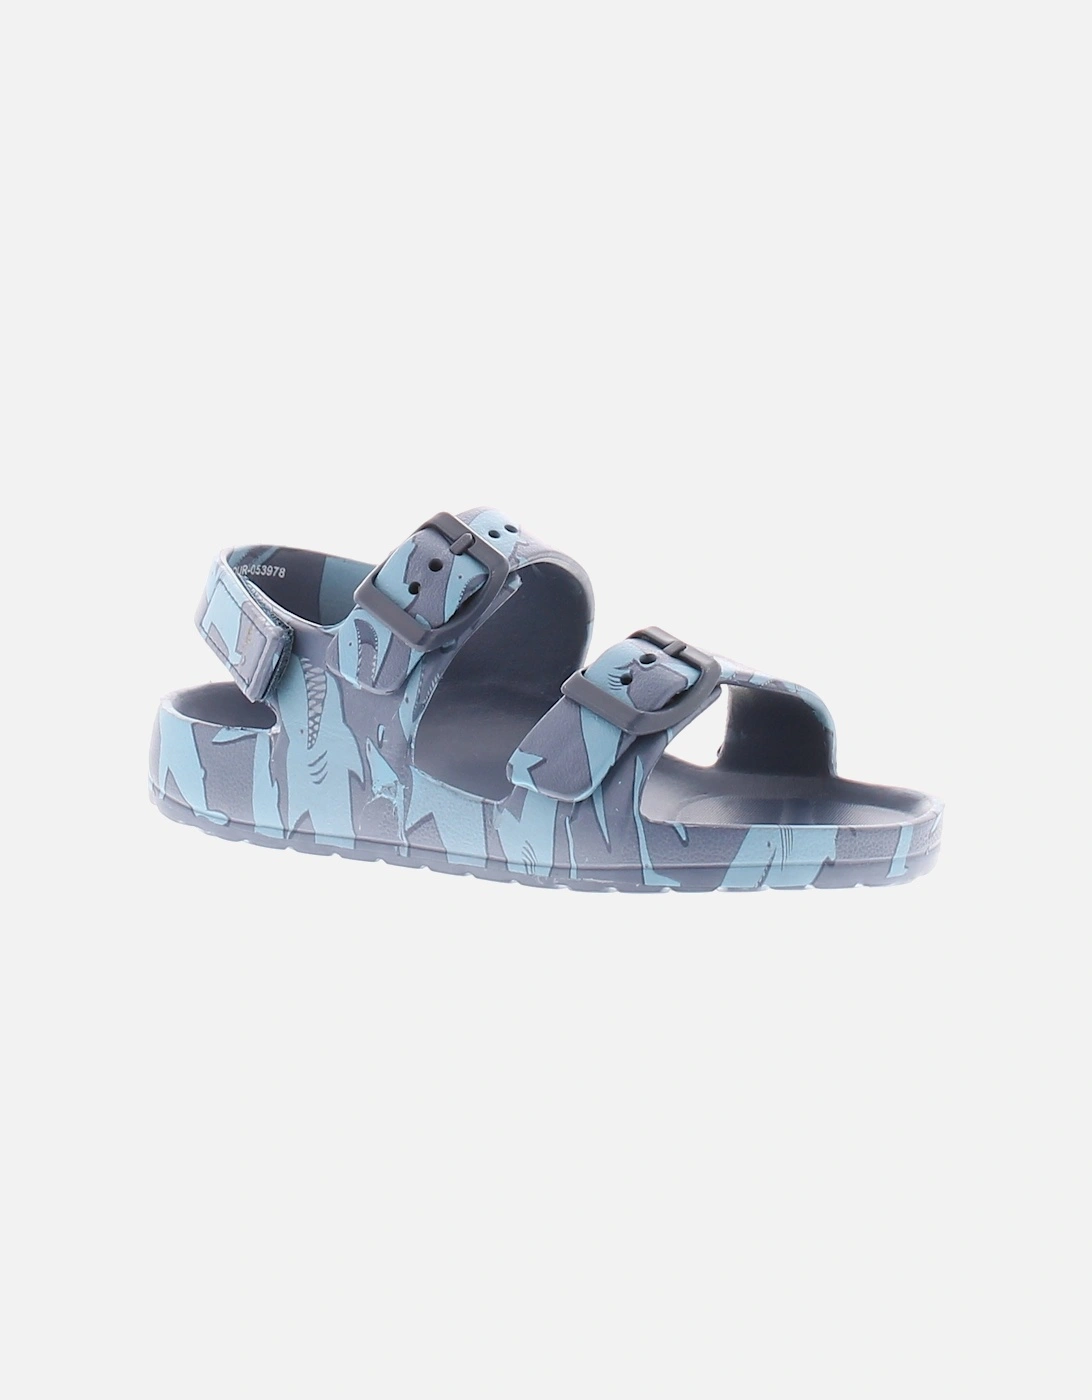 Younger Boys Sandals Sliders Spencer Navy Dual Size UK Size, 6 of 5